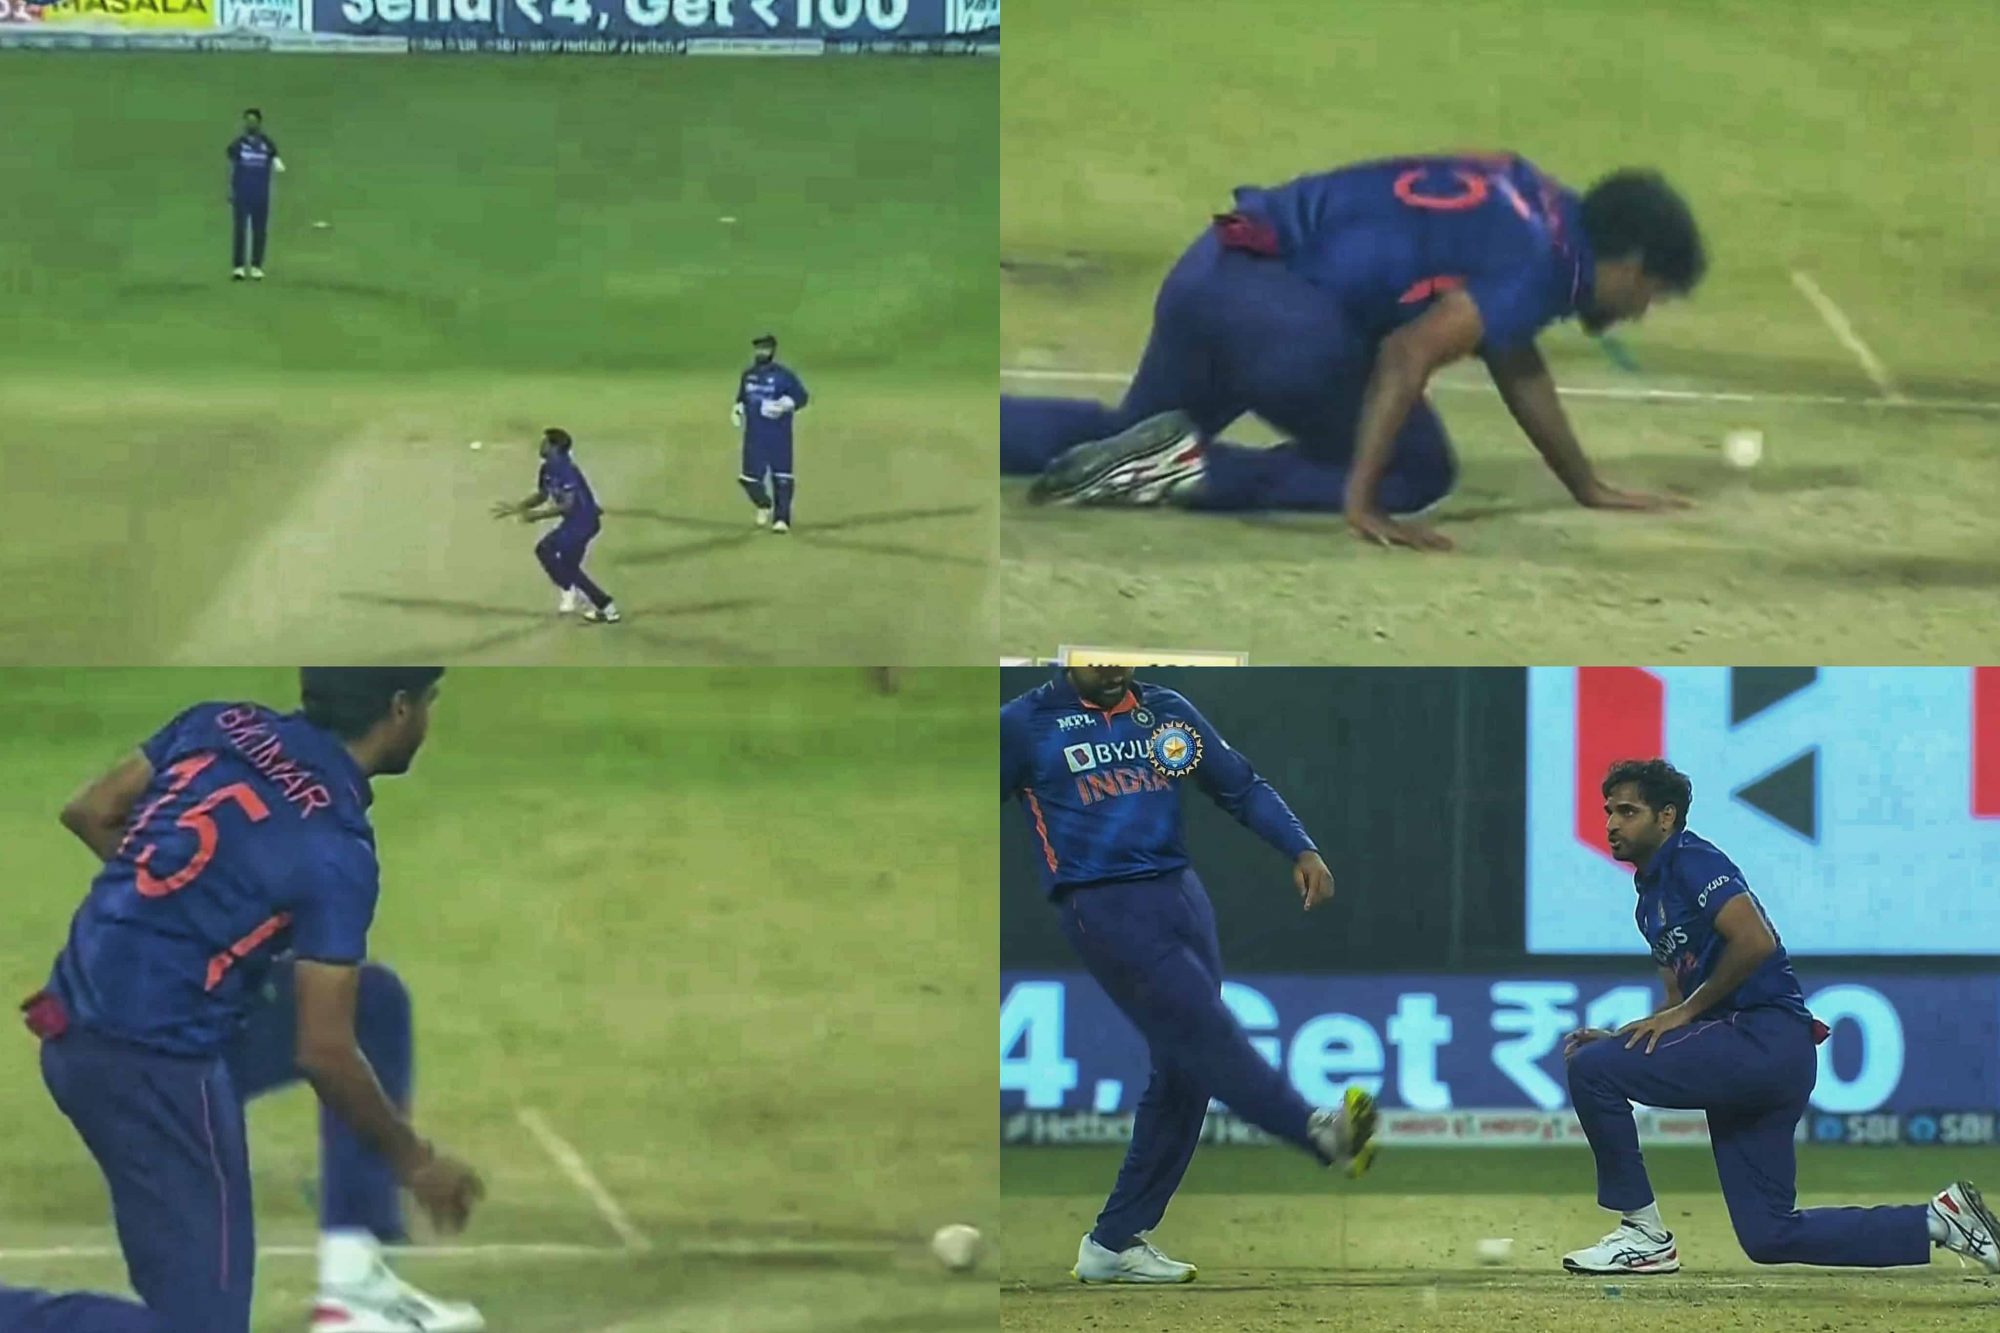 Watch: Rohit Sharma Kicks The Ball In Frustration After Bhuvneshwar Kumar Dropped A Catch